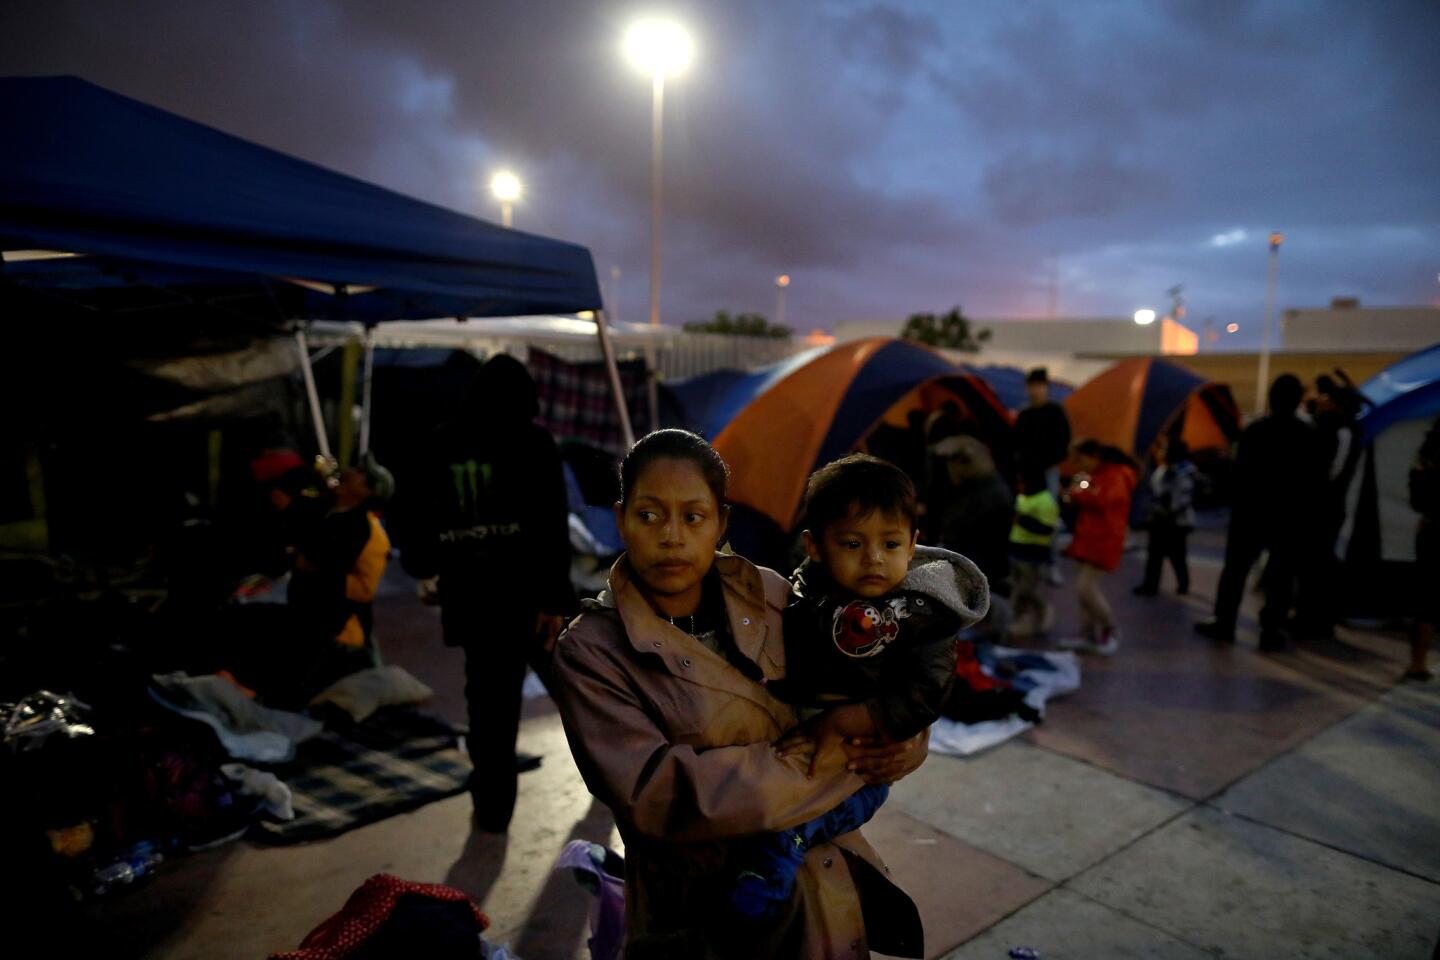 Night falls on a camp where nearly 200 Central American migrants seeking asylum in the U.S. gather on their third day near the El Chaparral port of entry in Tijuana.